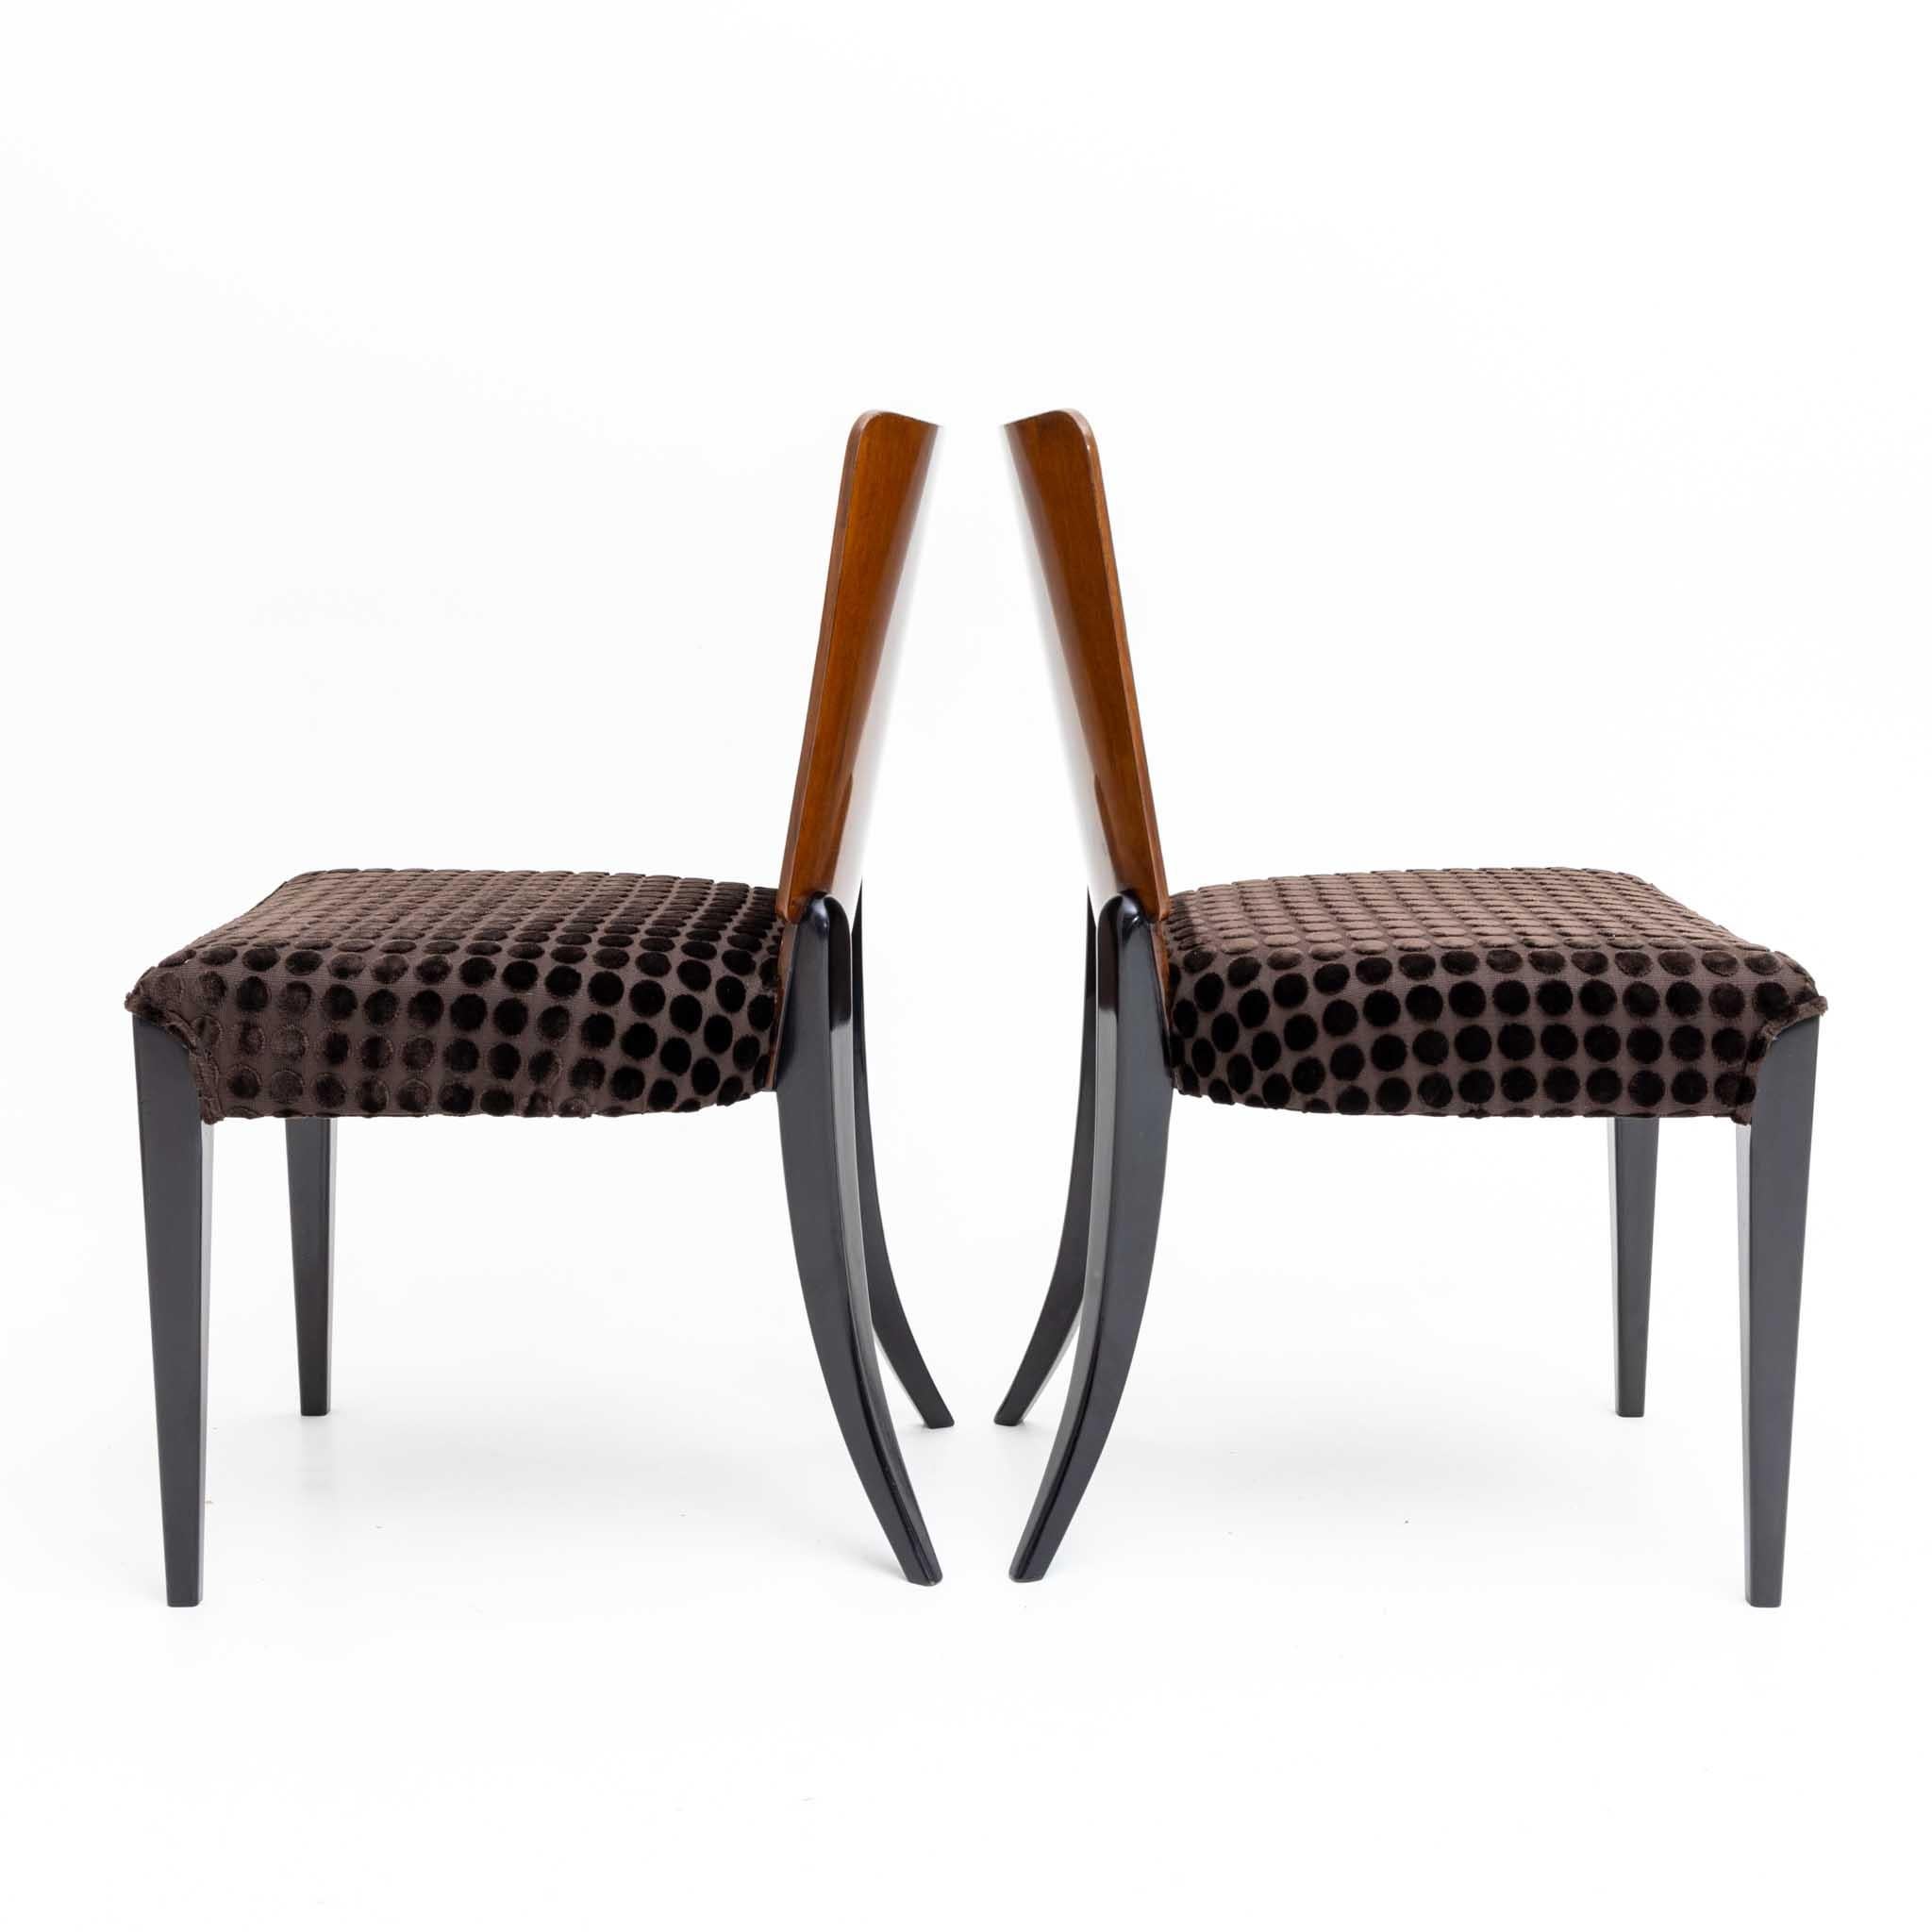 Eight chairs by Jindrich Halabala with ebonised legs and trapezoidal backrest. The chairs are restored and in very good condition.